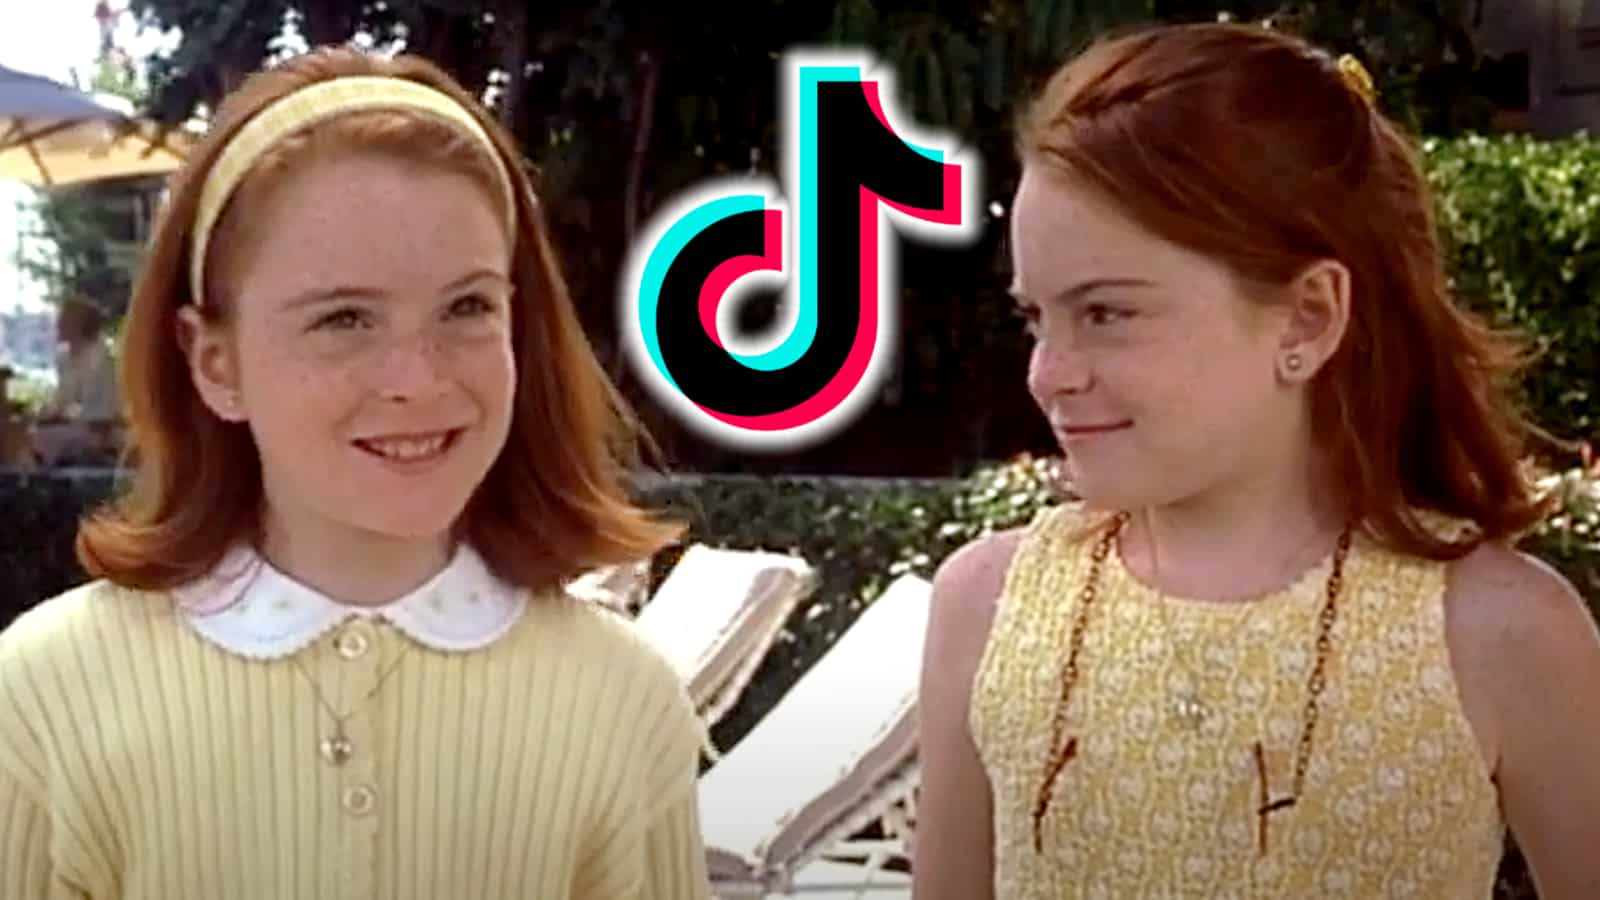 Lindsay Lohan in the parent trap